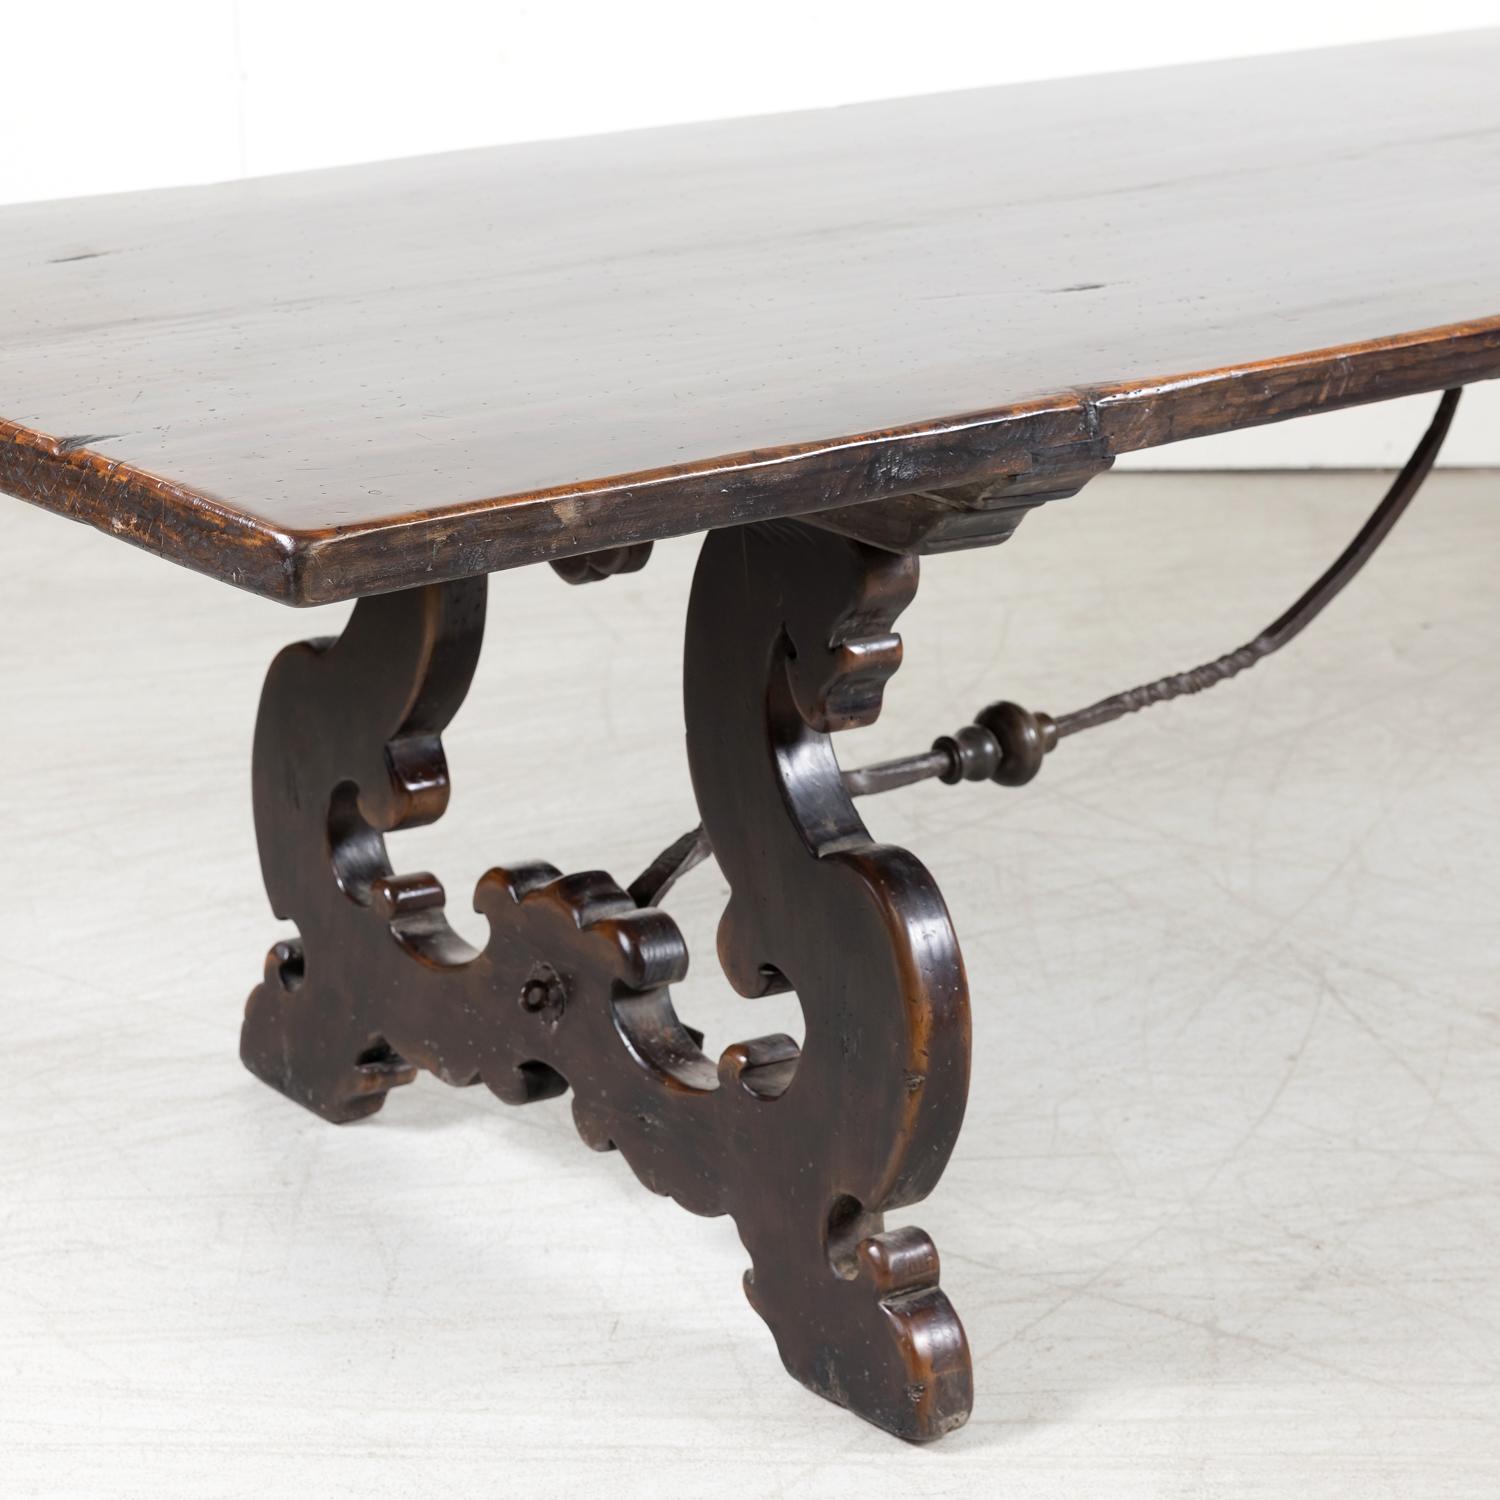 Lge 19th Century Spanish Baroque Style Trestle Dining Table with Iron Stretcher For Sale 8